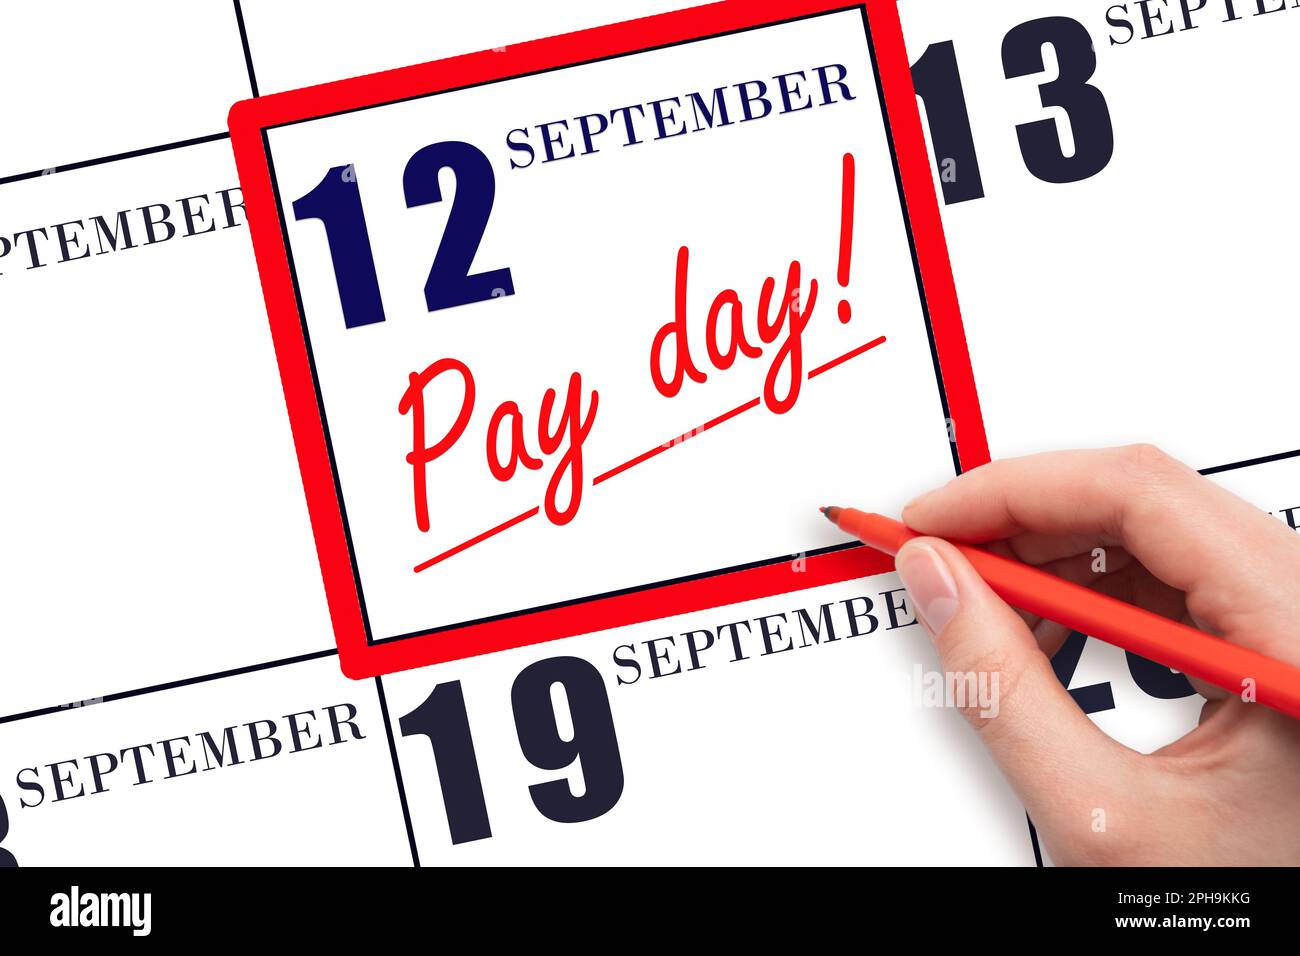 12th day of September. Hand writing text PAY DATE on calendar date September  12 and underline it. Payment due date.  Reminder concept of payment. Aut Stock Photo